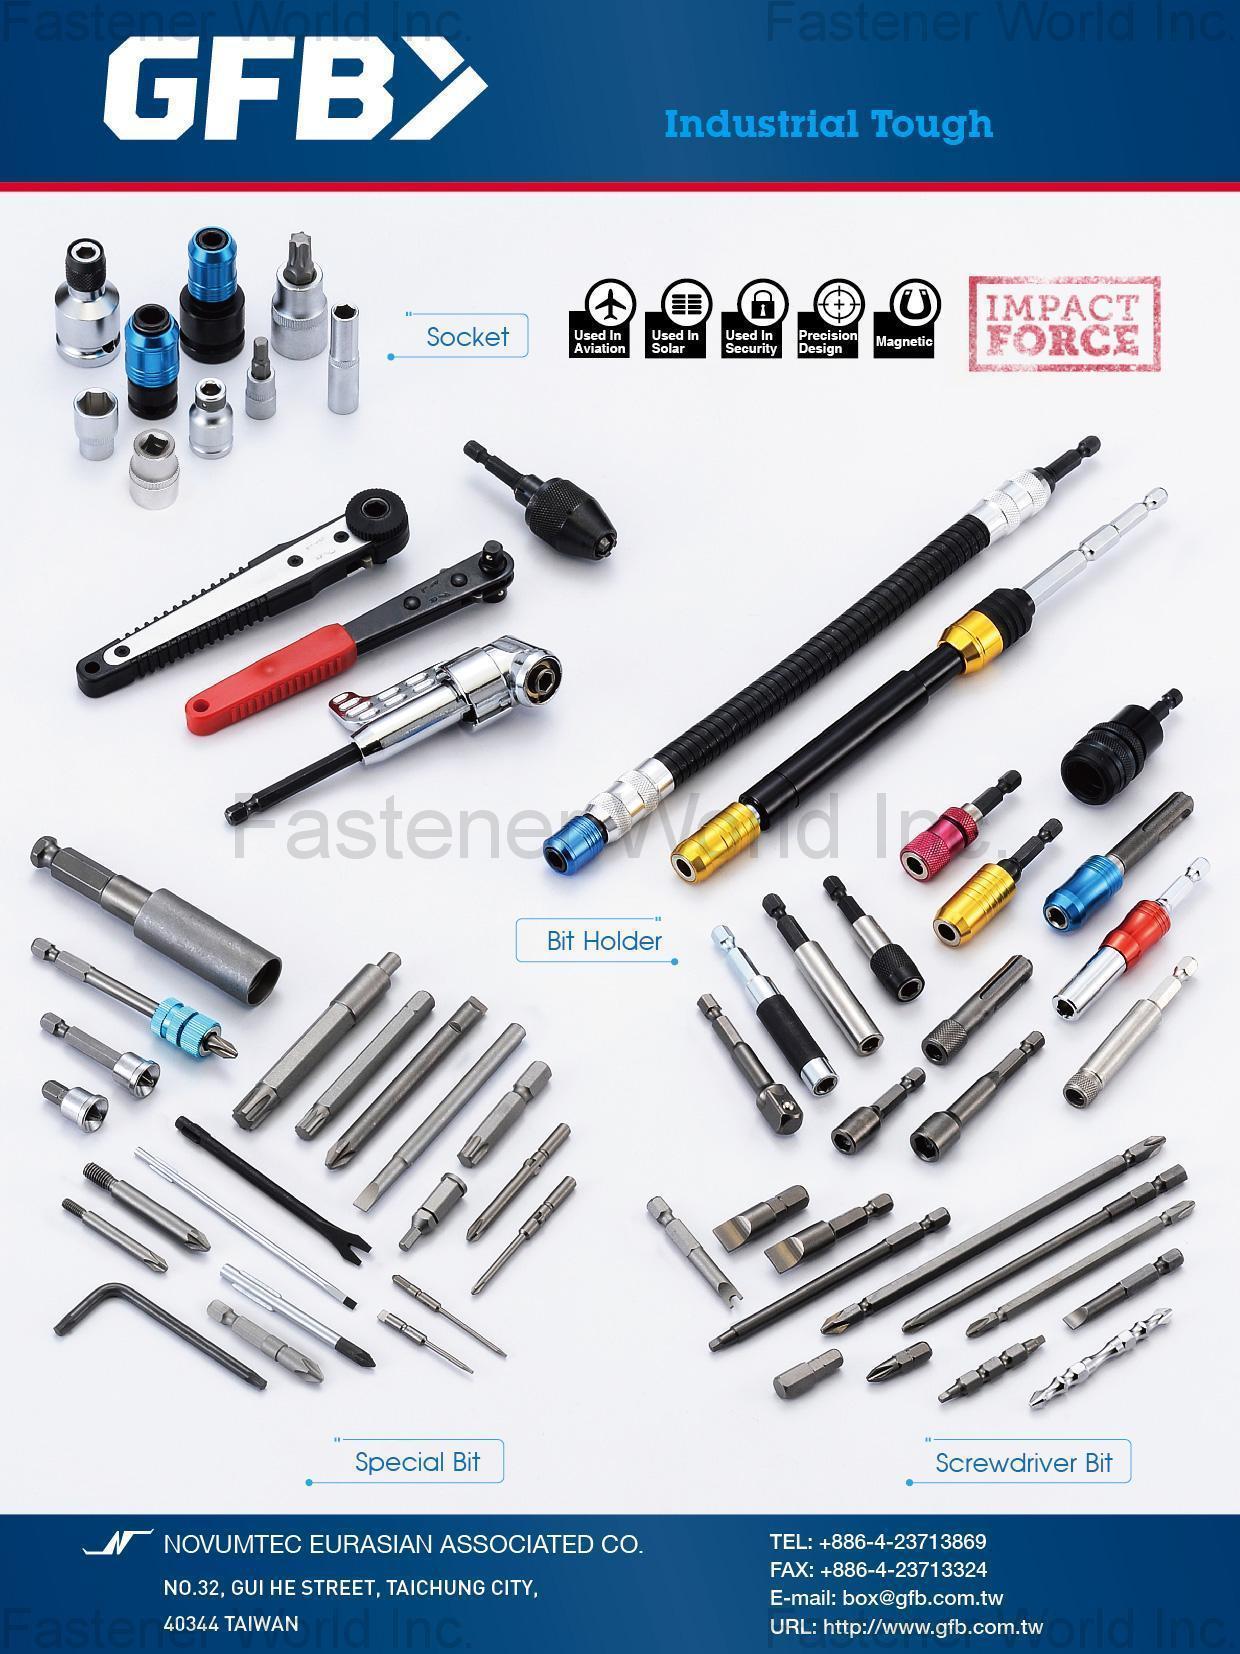 NOVUMTEC EURASIAN ASSOCIATED CO. , Insert Bit Shank, Double Bit, Nutstter & Bit Holder, Screwdriver Bits for all Screws and Bolts, Electric Screw Driver Bit, Magnetic Bit Holder, Socket Adaptor, Socket Extension, Nut Setter Magnet and Non-Magnet, Power Tool Accessories, Normal and Special Drivers + Chisel, Drill Parts and Accessories, Grinding Polish and Brush, Impact Socket, Adaptor, Extension Barention Bar, Saw Blade, Hole Saw, Brushes, Power Hamer Chisels